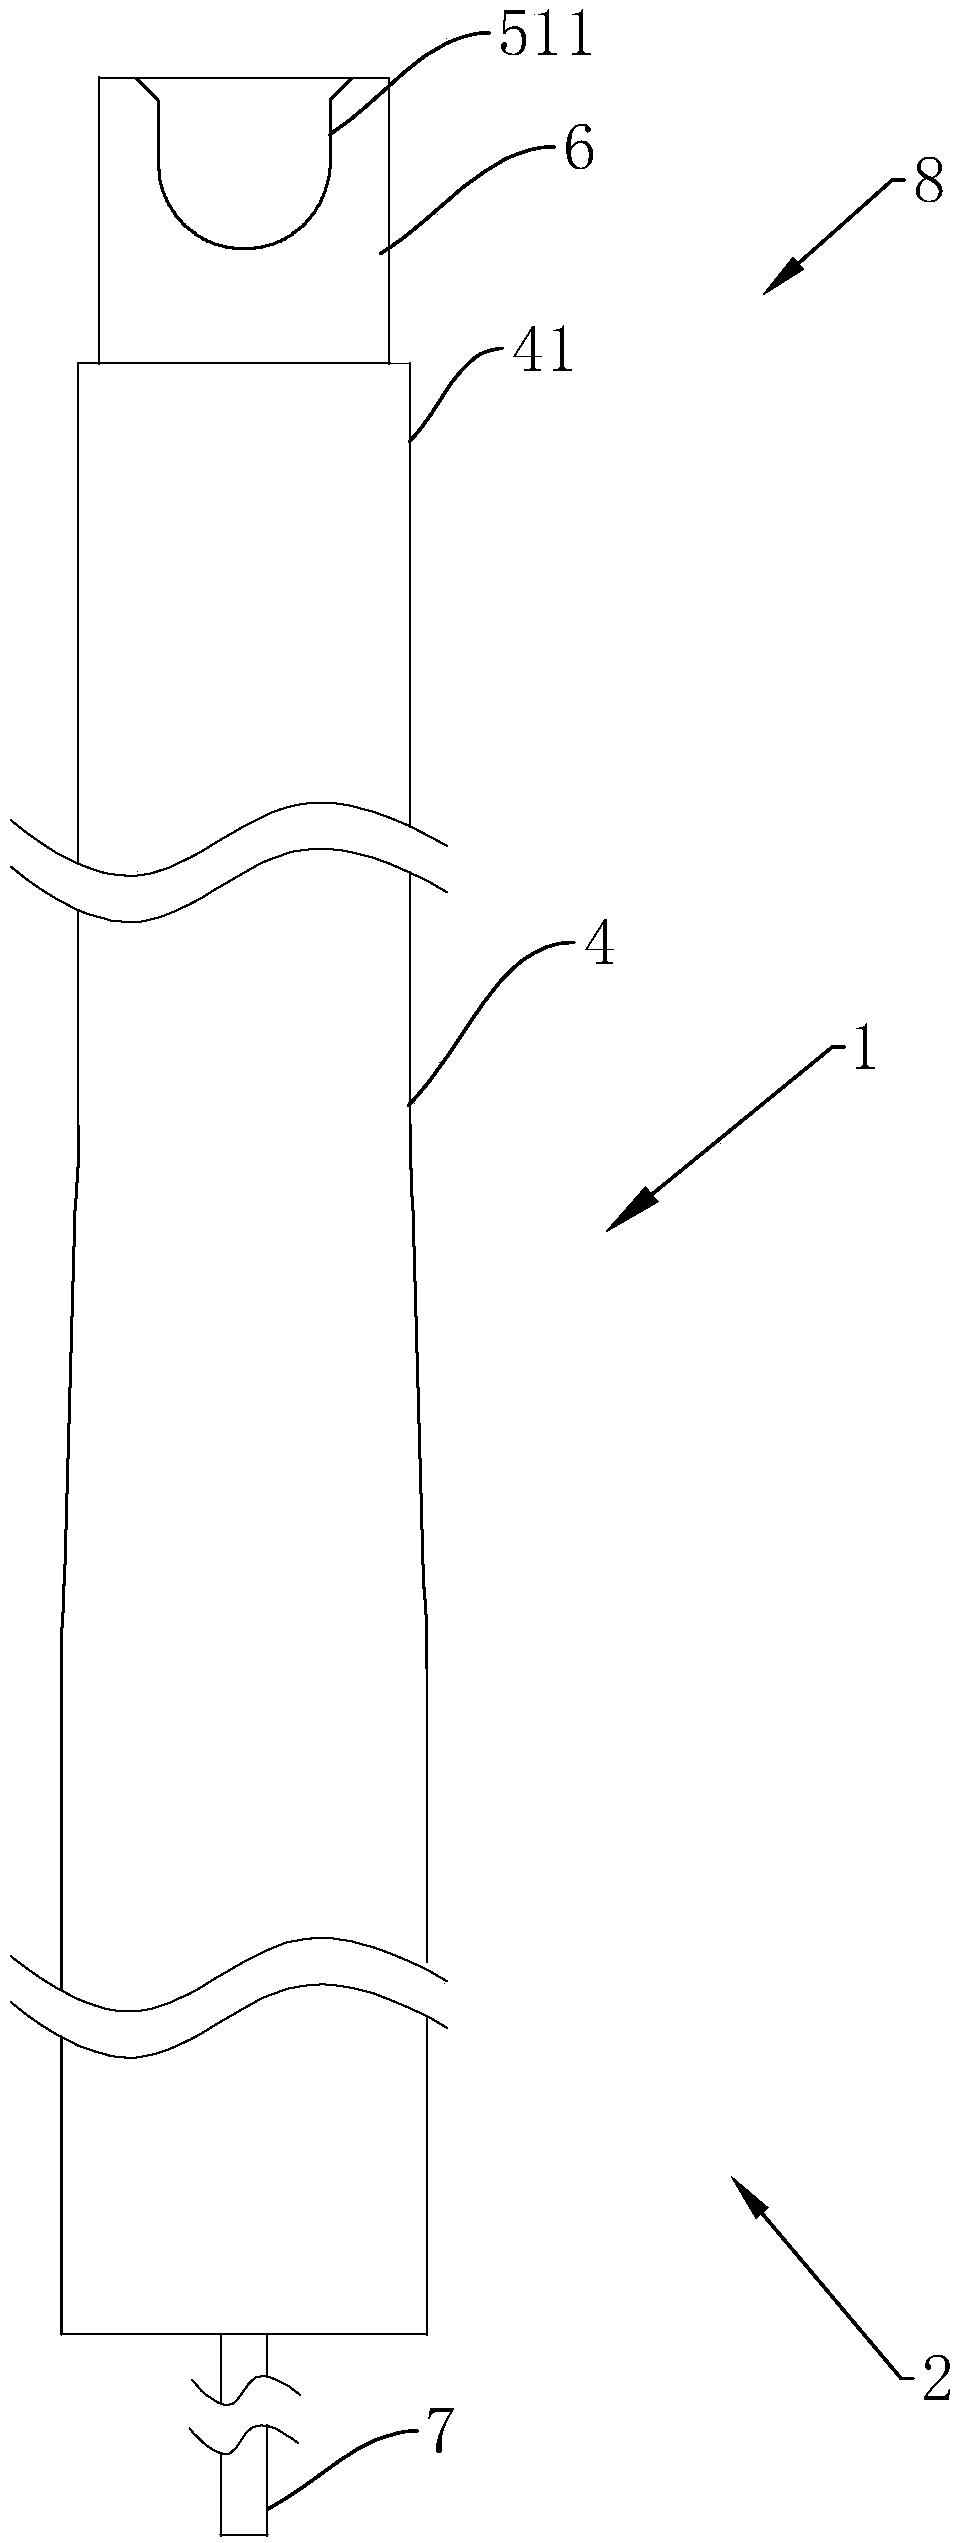 Flexible tapered endoscope catheter with braided wire structure